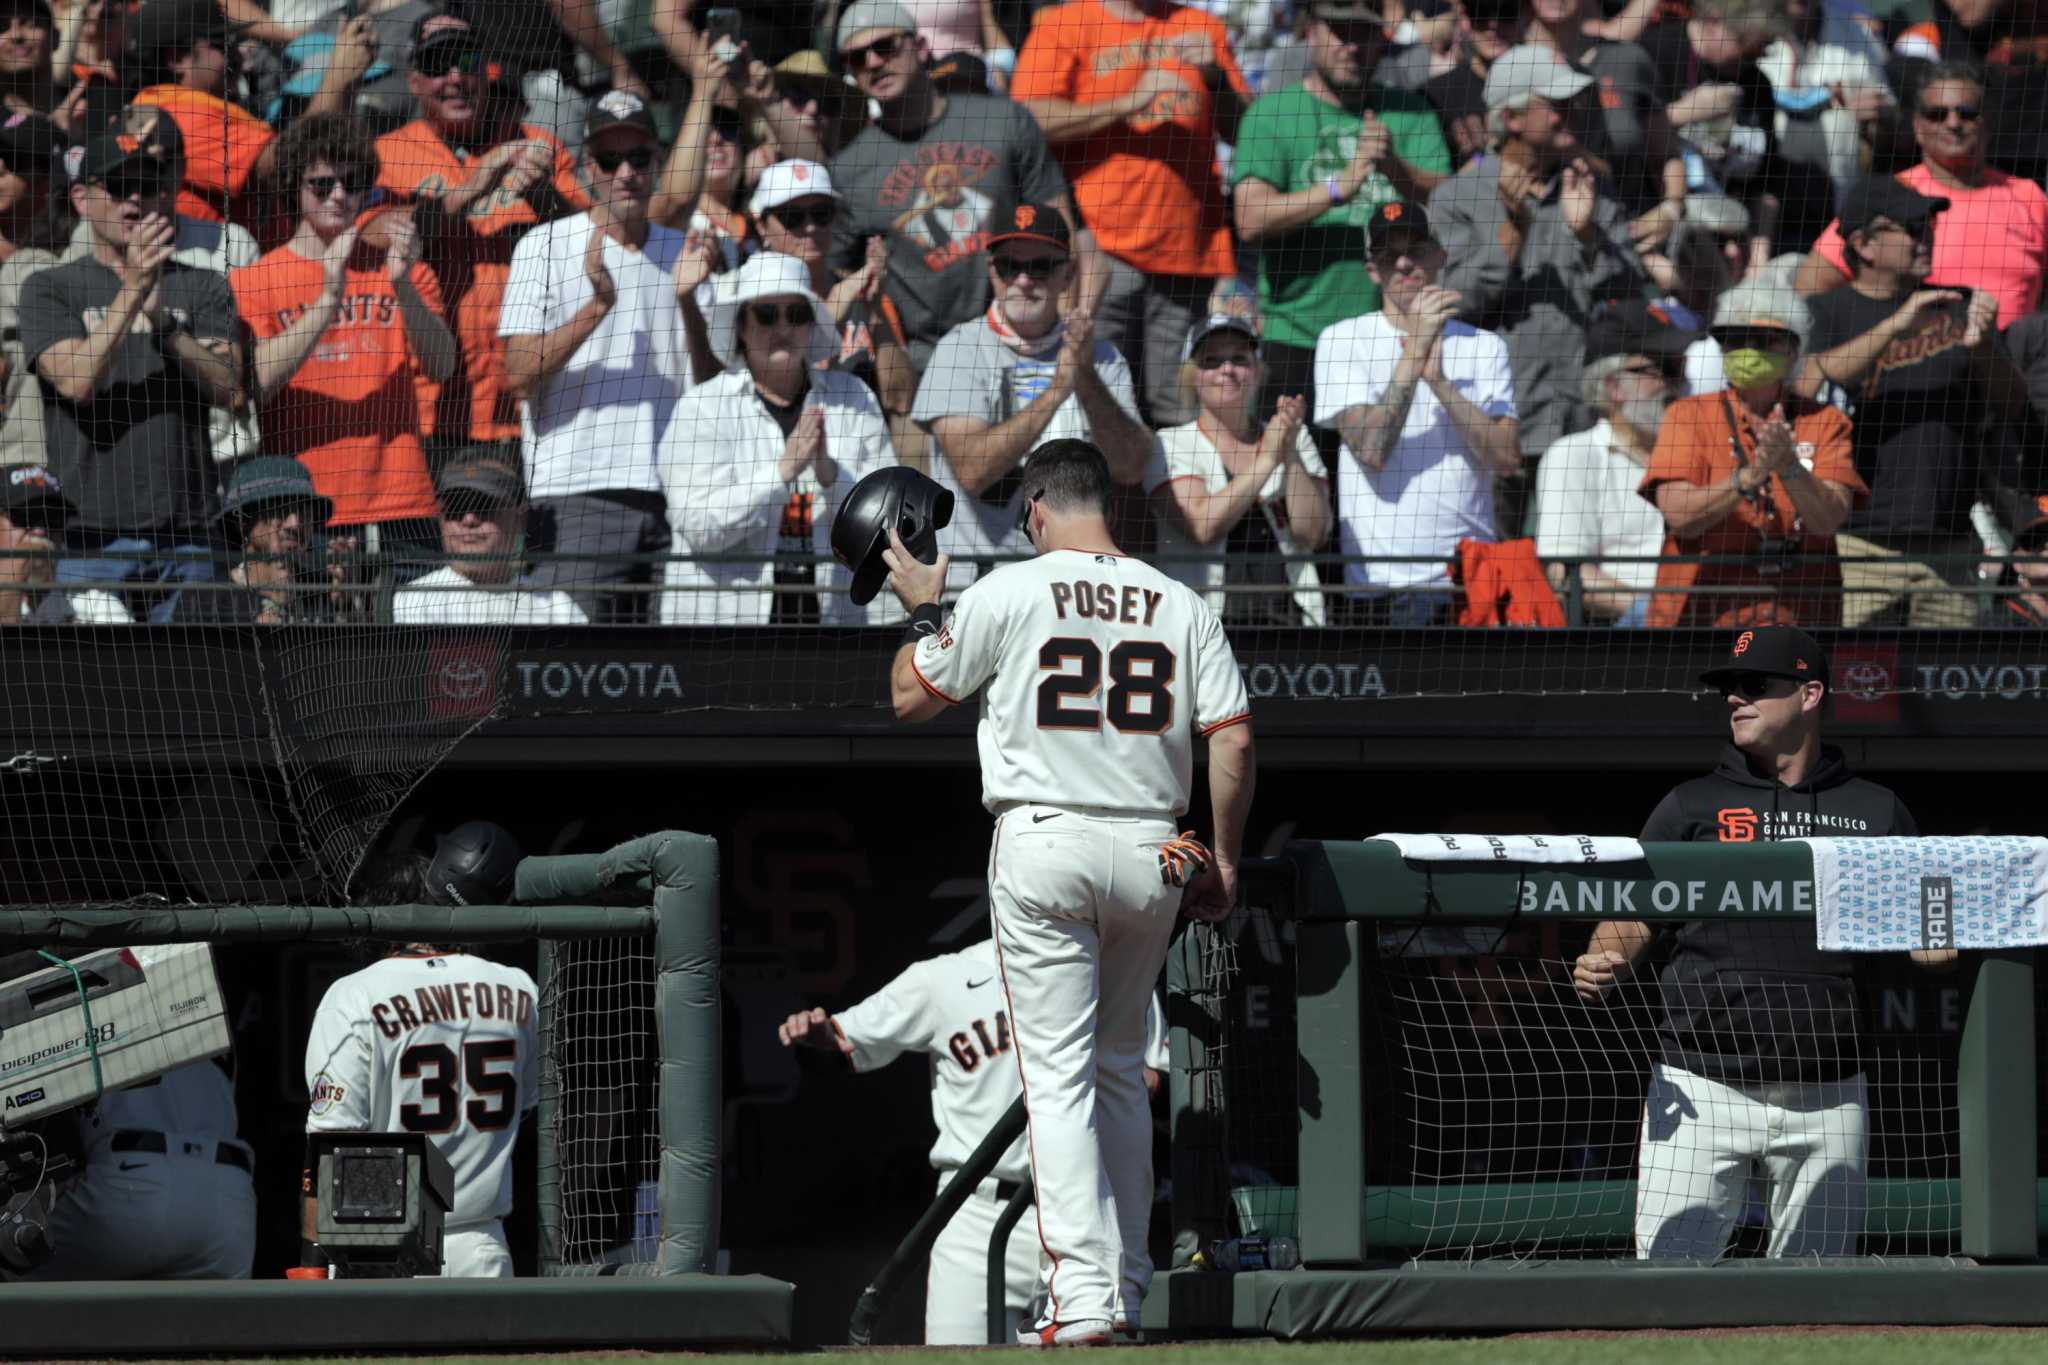 SF Giants News: Should the Giants retire Buster Posey's number